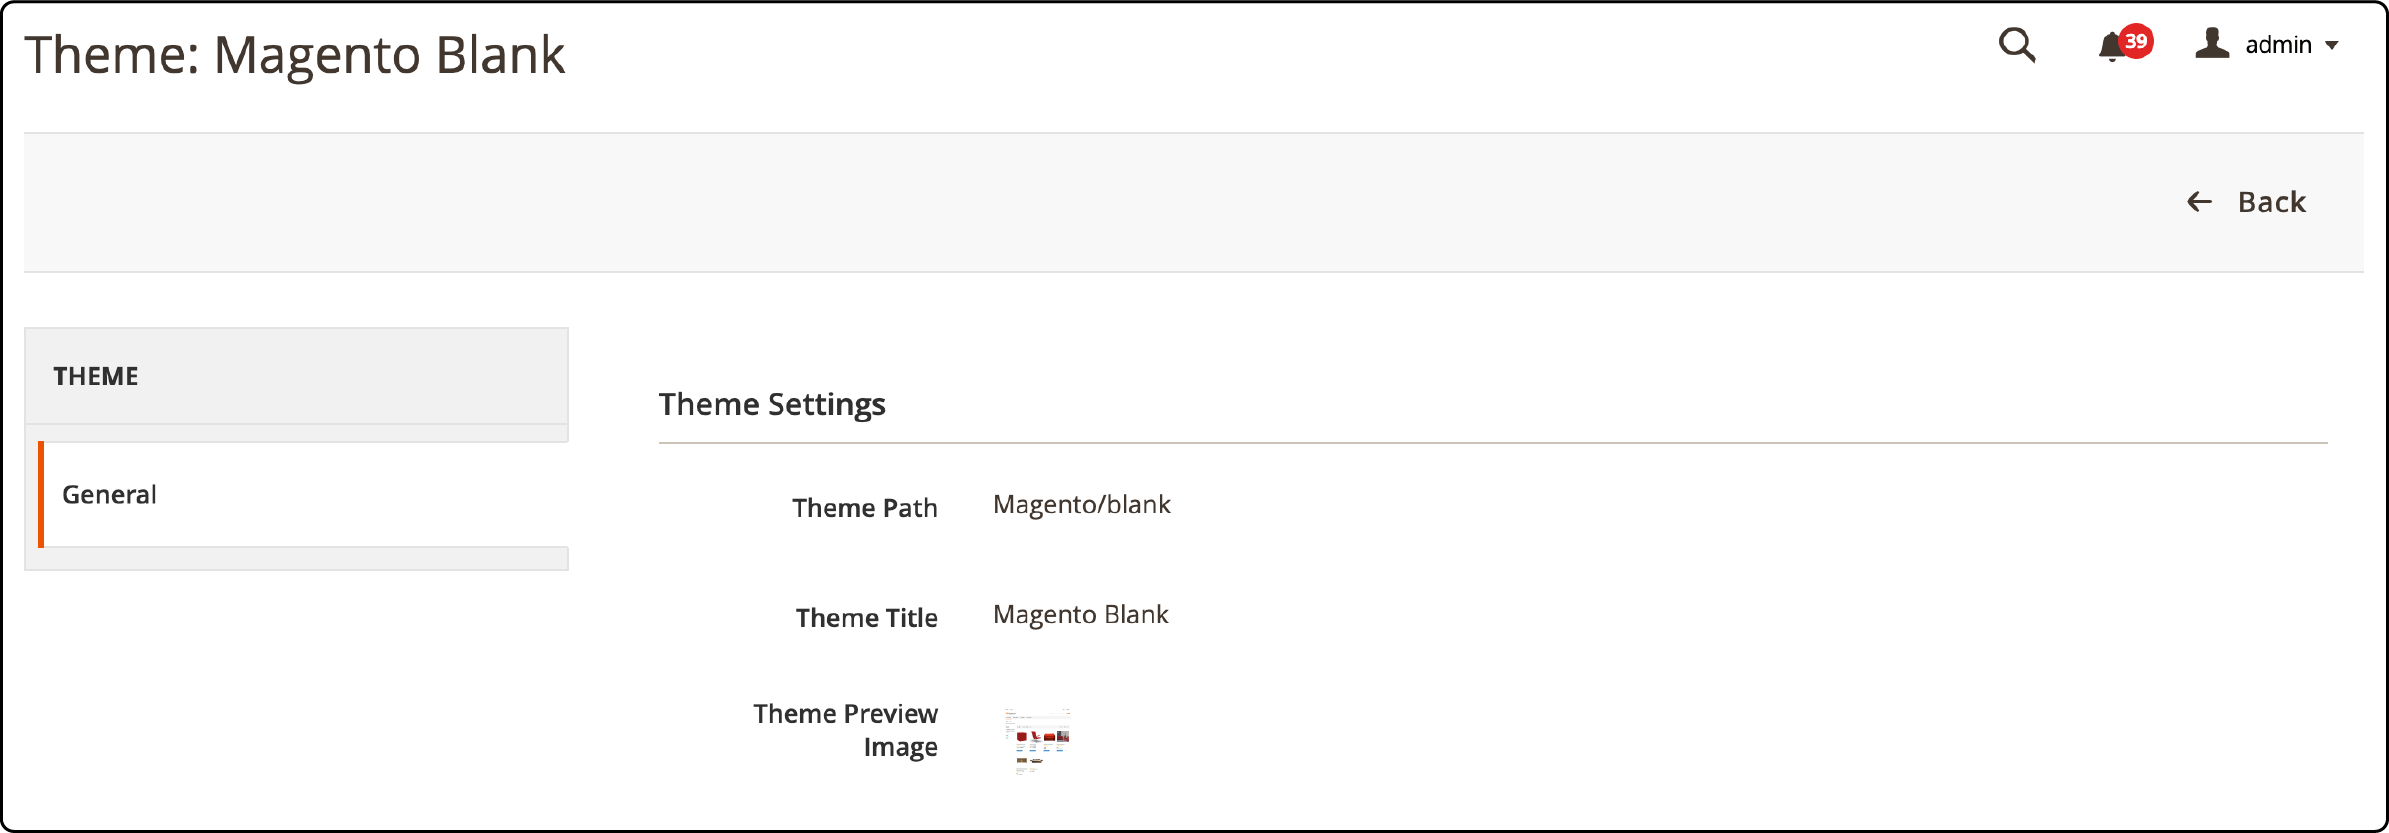 Preview of a selected theme in Magento 2 showcasing layout and design